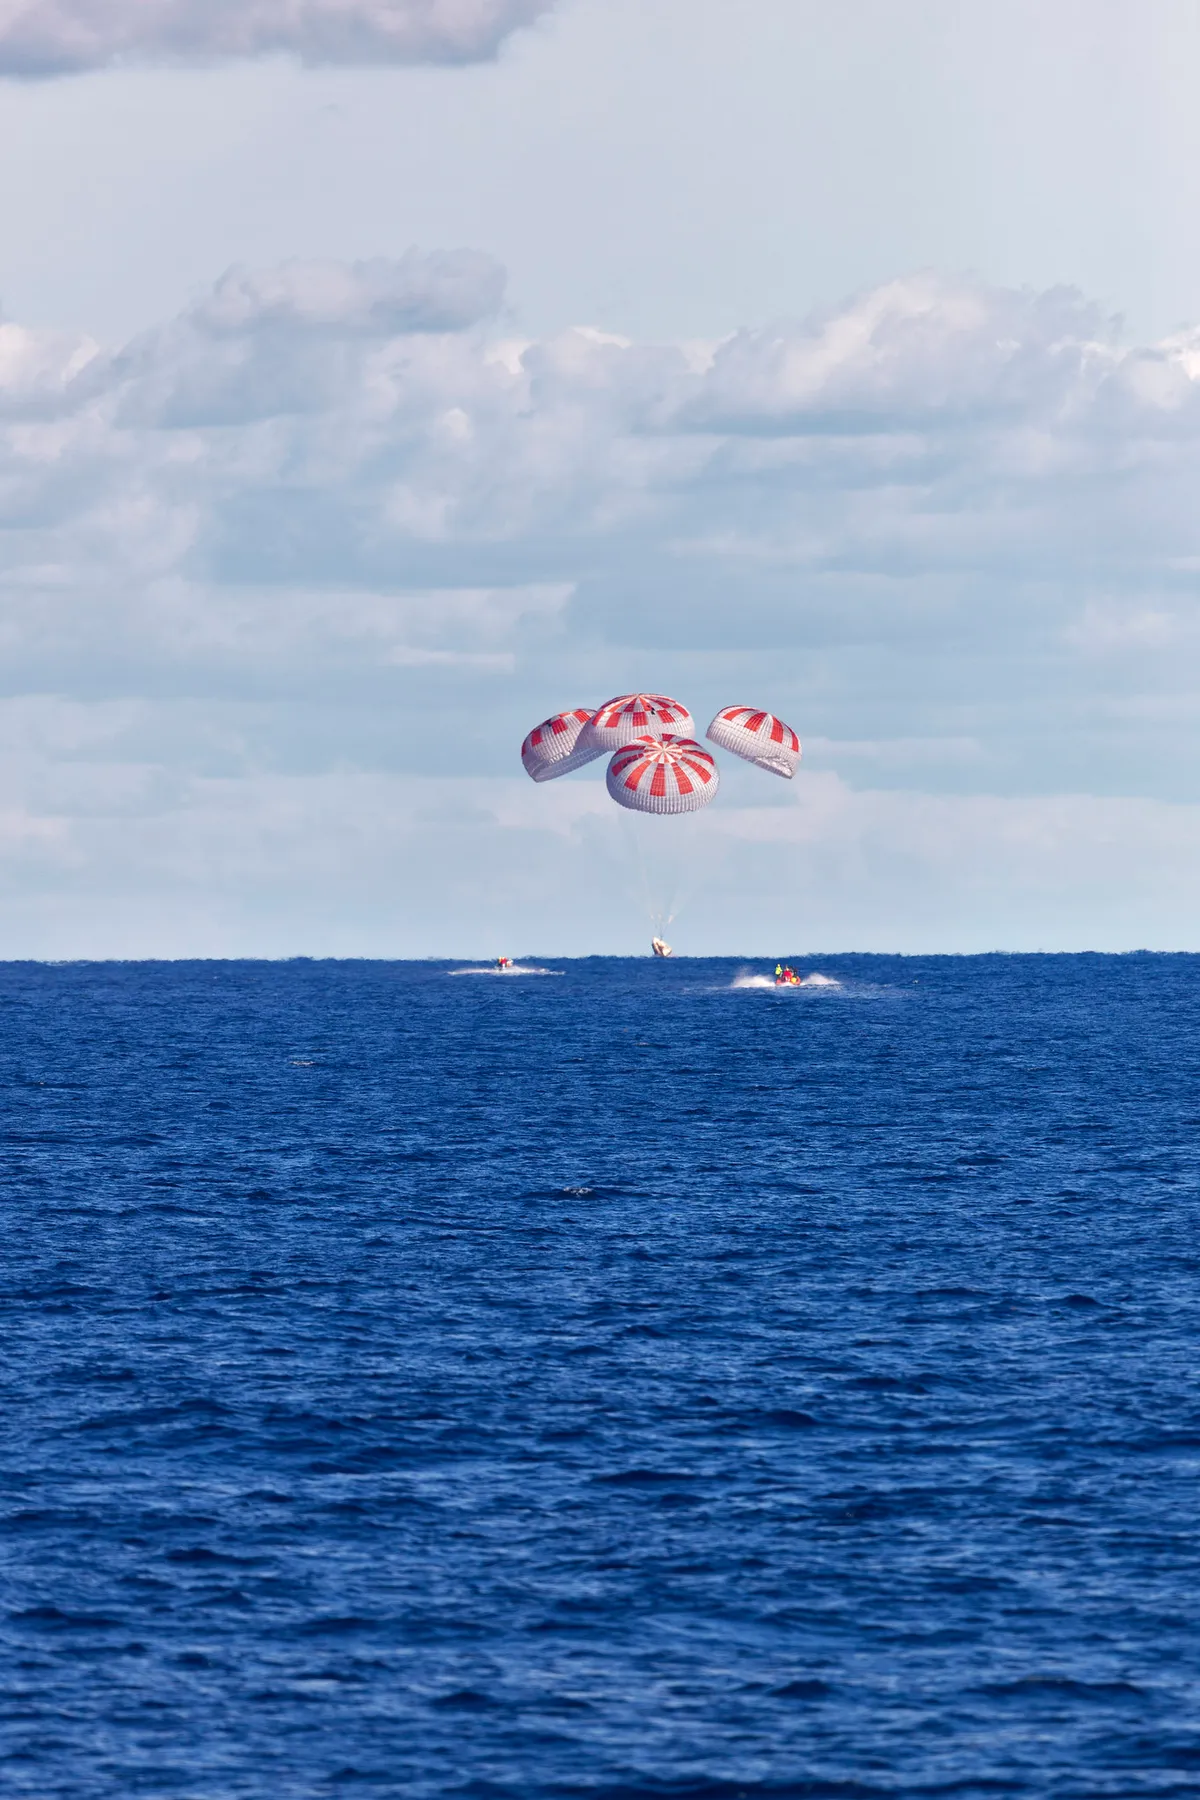 SpaceX's Crew Dragon is guided by four parachutes as it splashes down in the Atlantic Ocean about 200 miles off Florida's east coast on 8 March 2019, after returning from the International Space Station on the Demo-1 mission © NASA